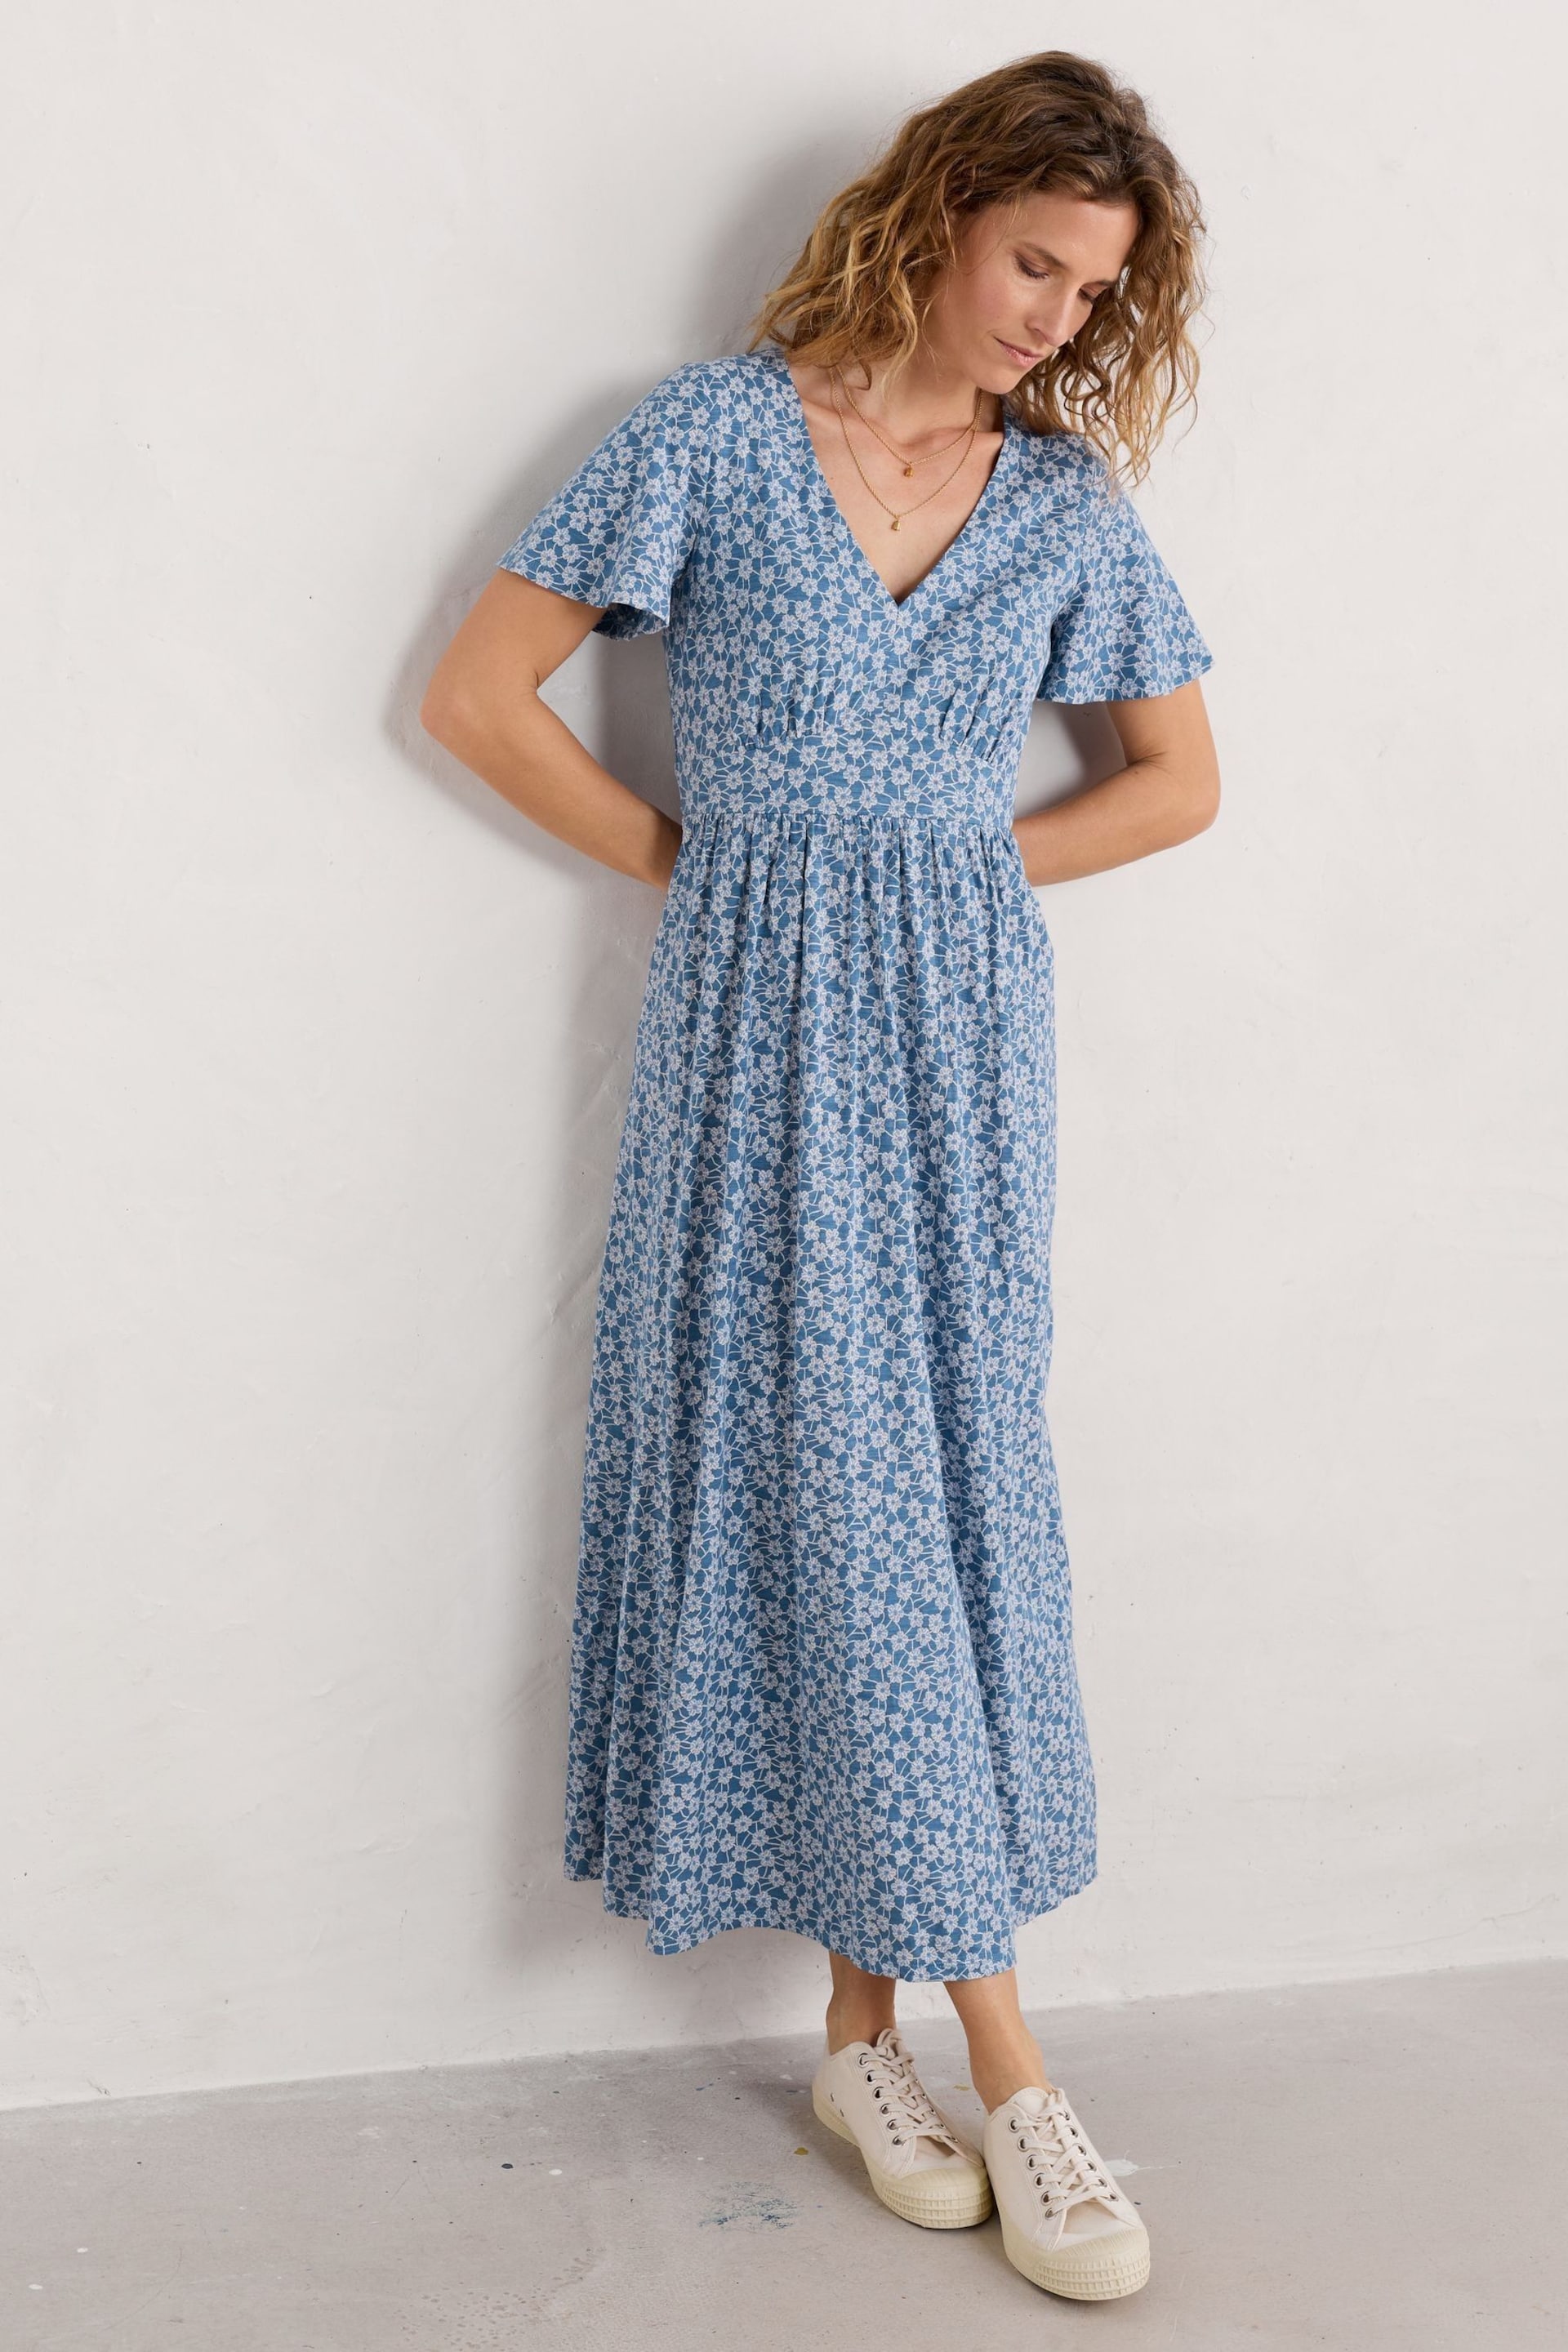 Seasalt Cornwall Blue Chateaux Dress - Image 3 of 5